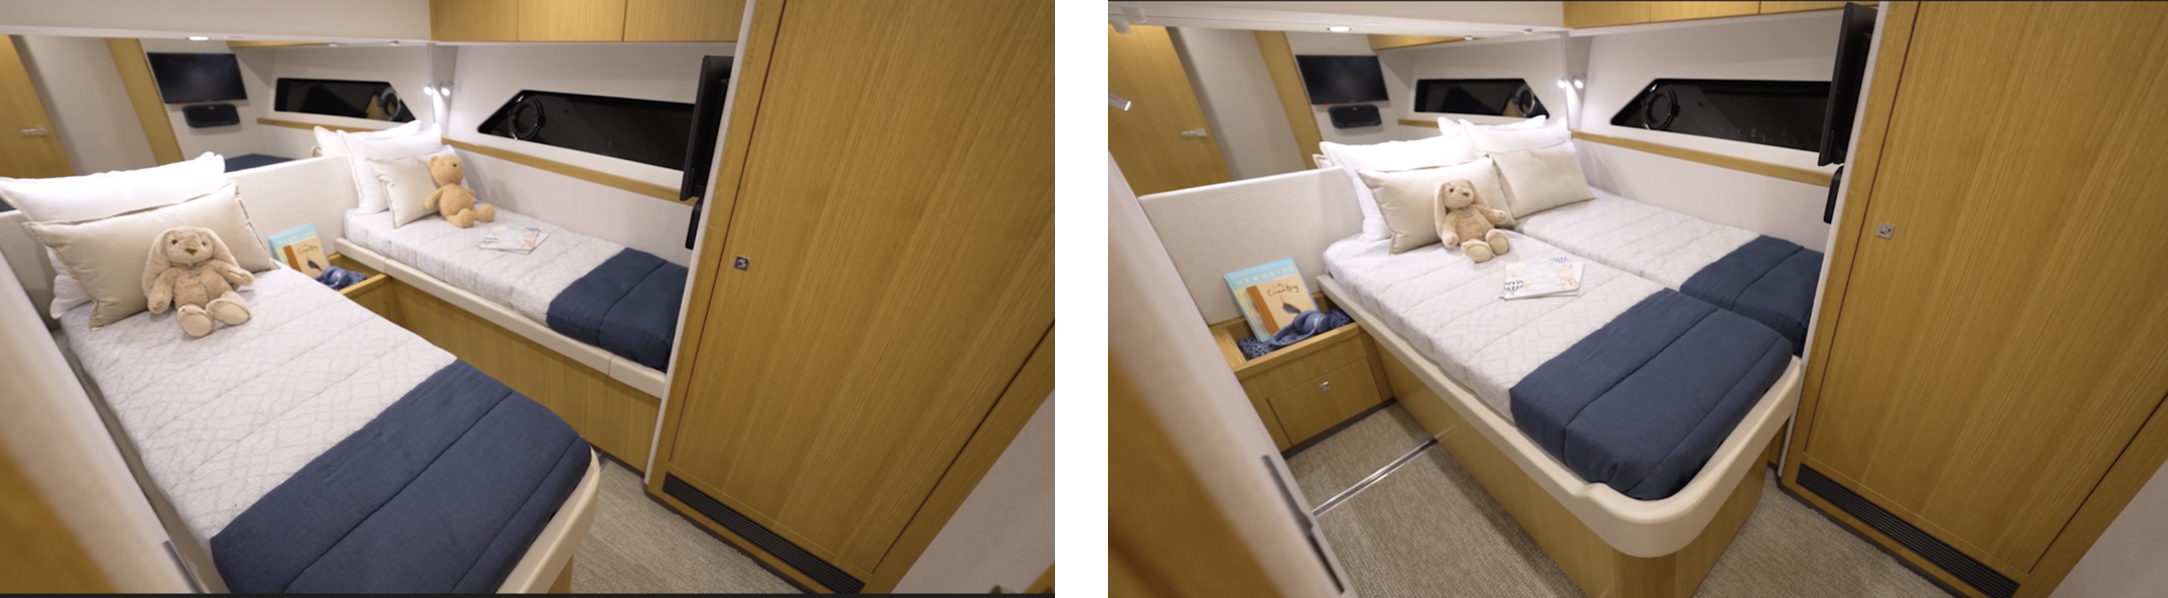 Riviera 58 SMY Double berth stateroom in both the double and larger single berth configuration